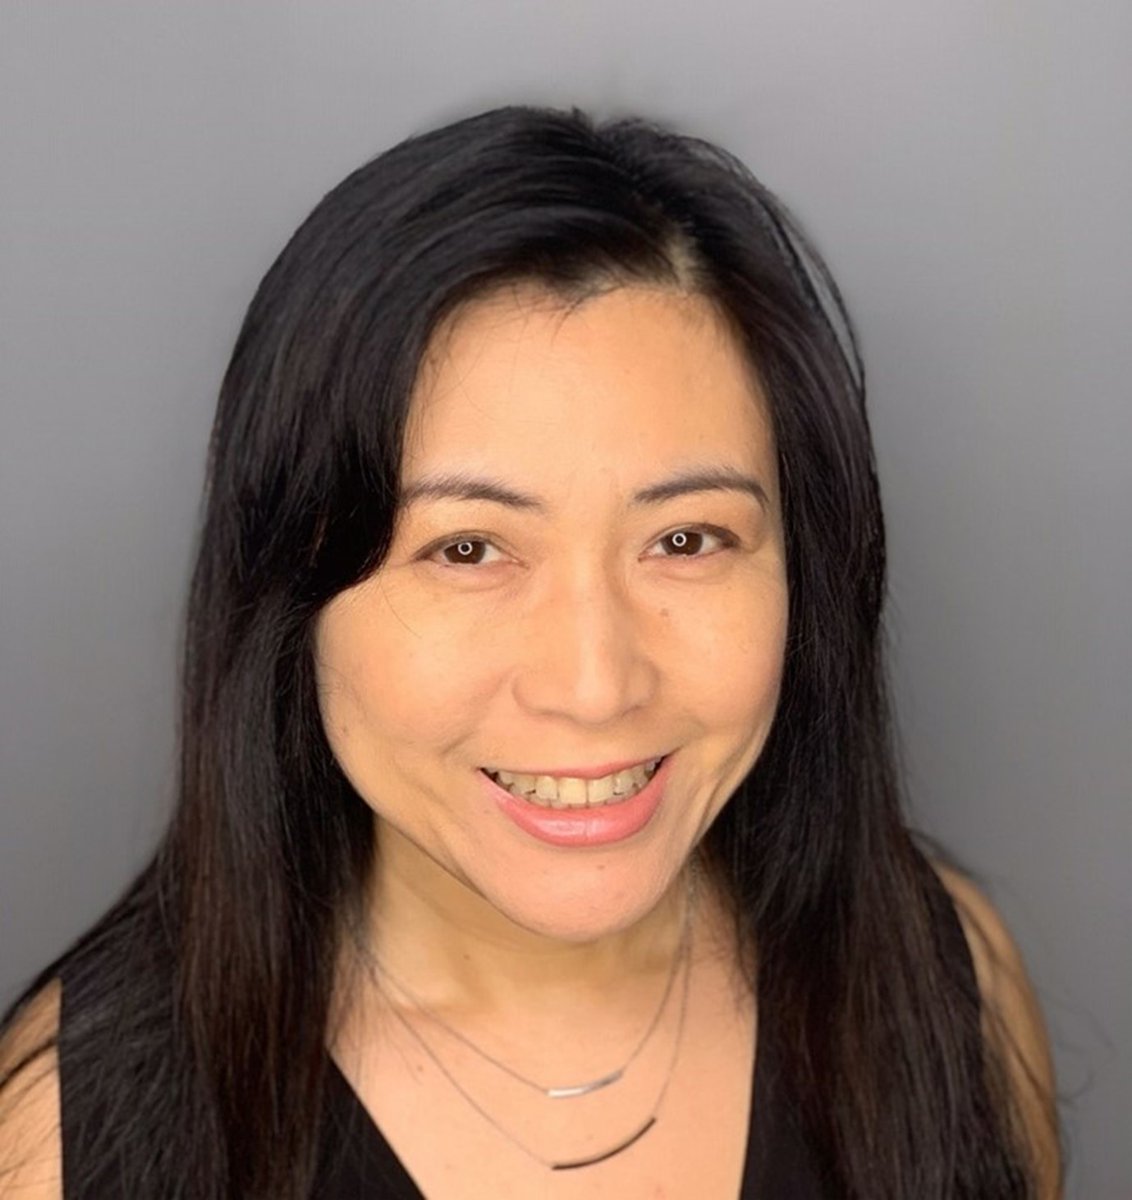 Meet the @ijaonline Associate Editors, @NagaoKyoko is a Research Scientist at @Nemours. Her research interests include #auditoryprocessing issues in #children and #adolescents, particularly individuals with #ADHD or #anxietydisorder